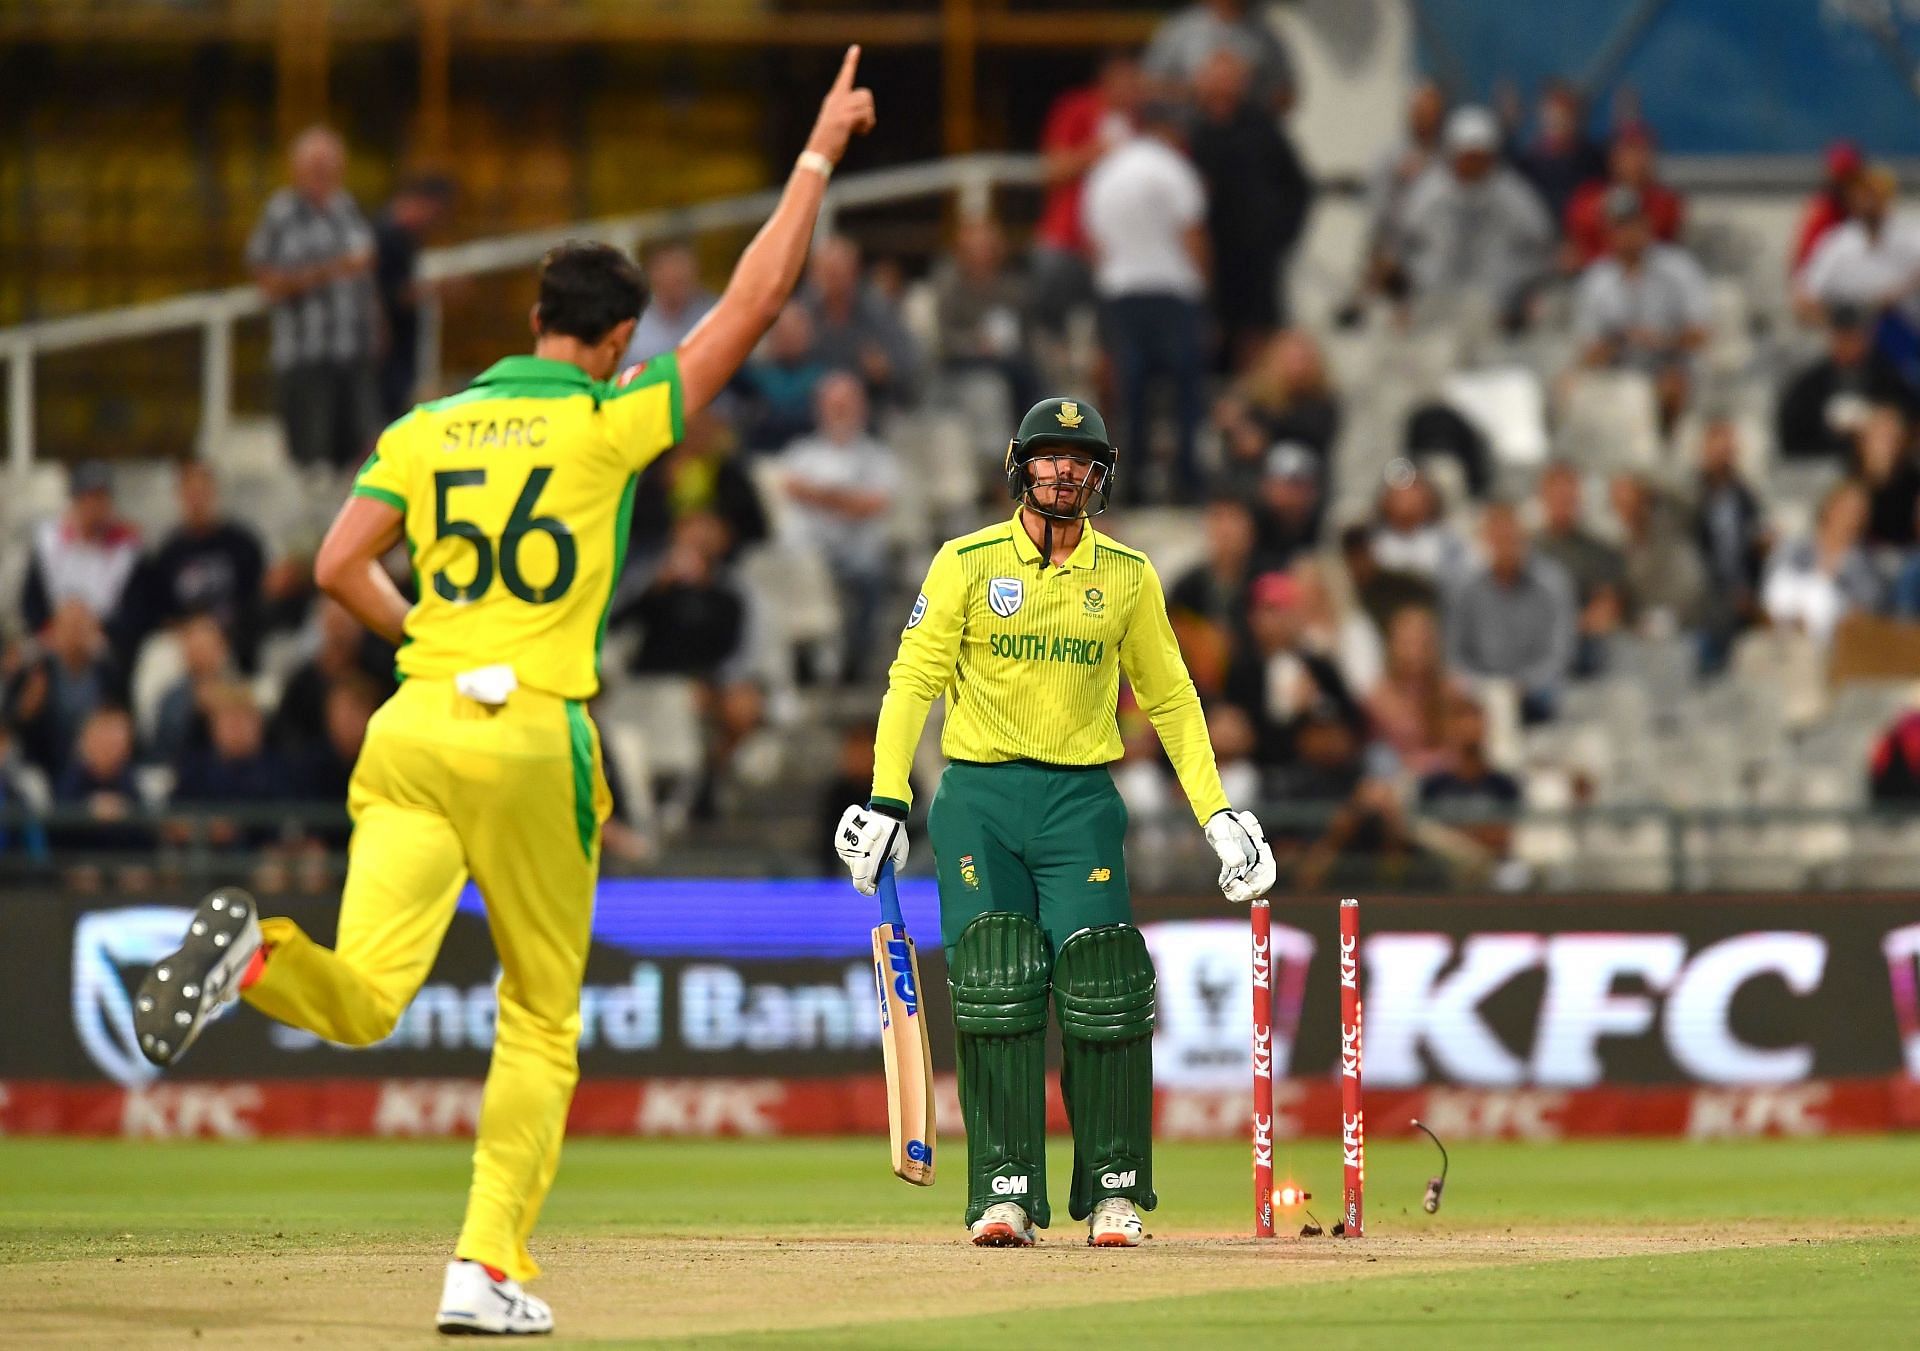 Australia defeated South Africa by 97 runs in their last T20I match